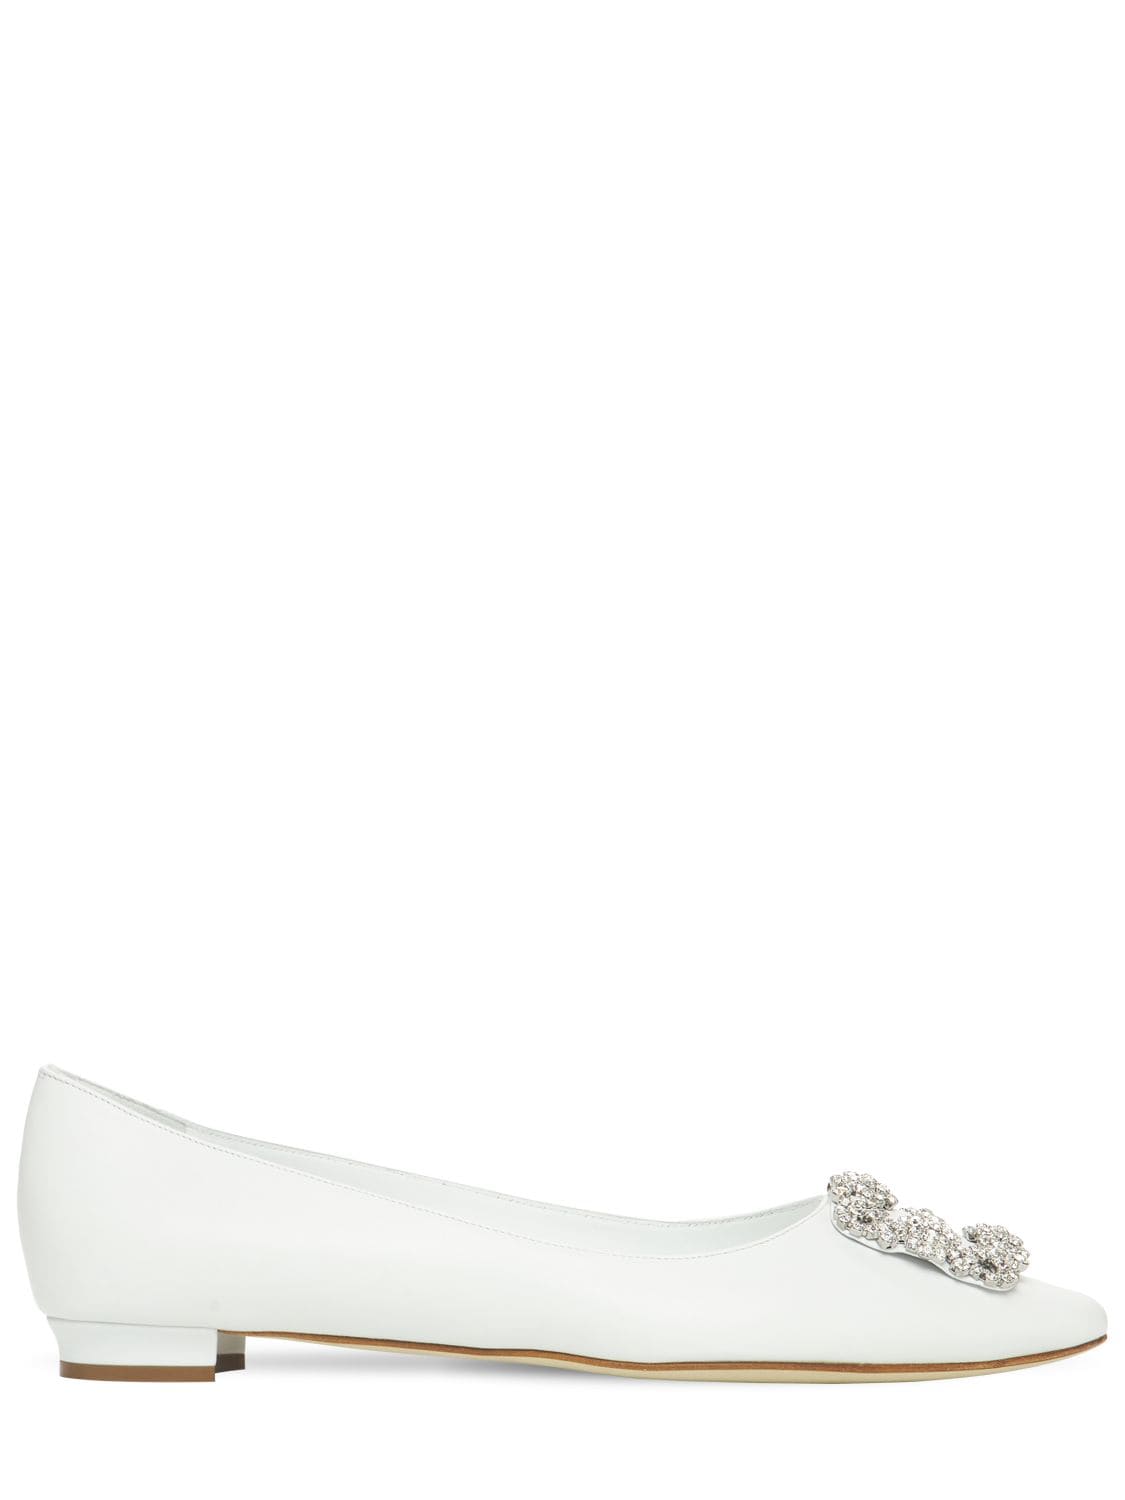 Manolo Blahnik 10mm Hangisi Leather Flats In White